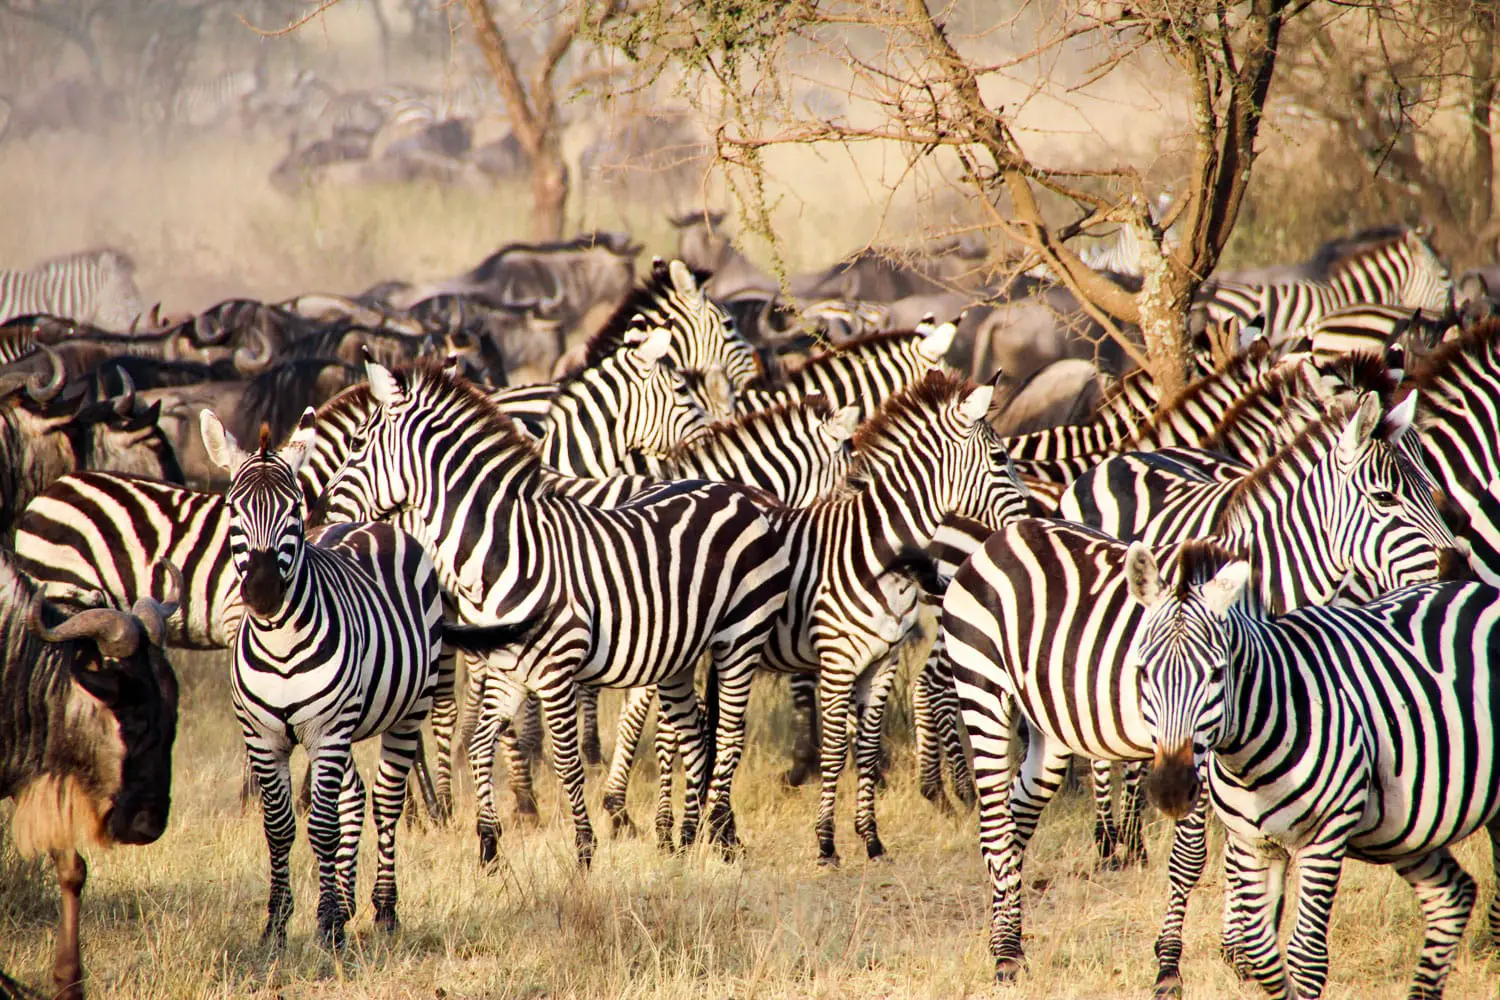 Zebras and wildebeests during the big migration in Serengeti National Park, Tanzania